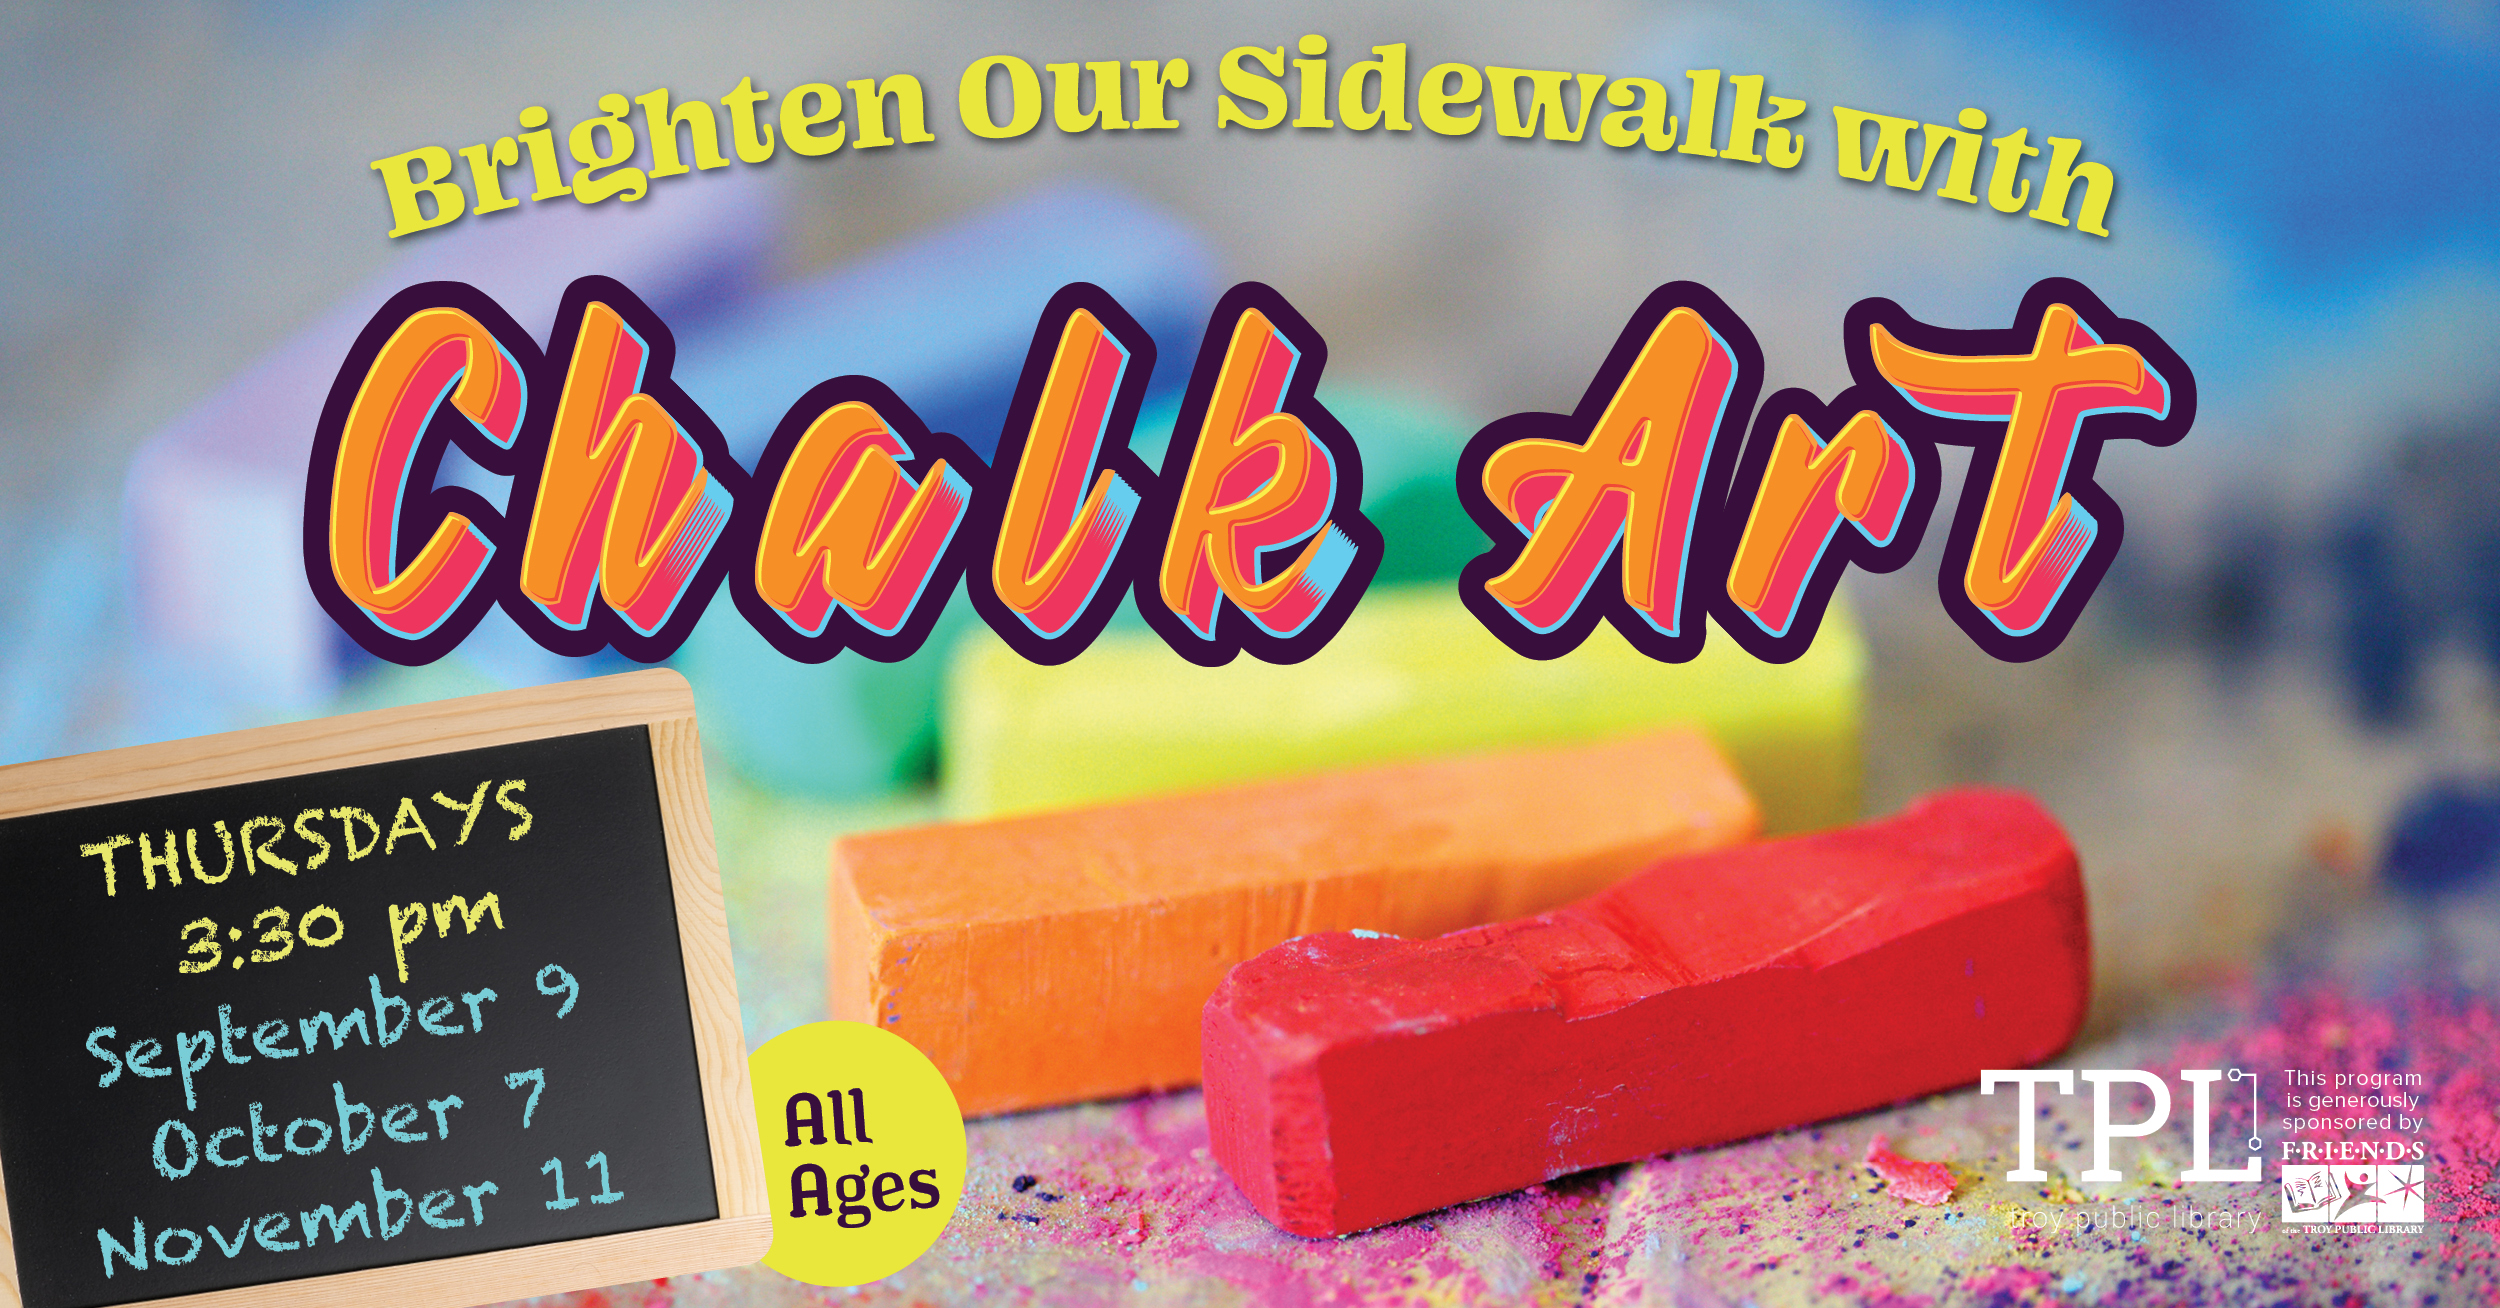 Brighten Our Sidewalks with Chalk Art. All Ages. Thursdays September 9, October 7, and November 11 at 3:30pm. Sponsored by the Friends of the Troy Public Library